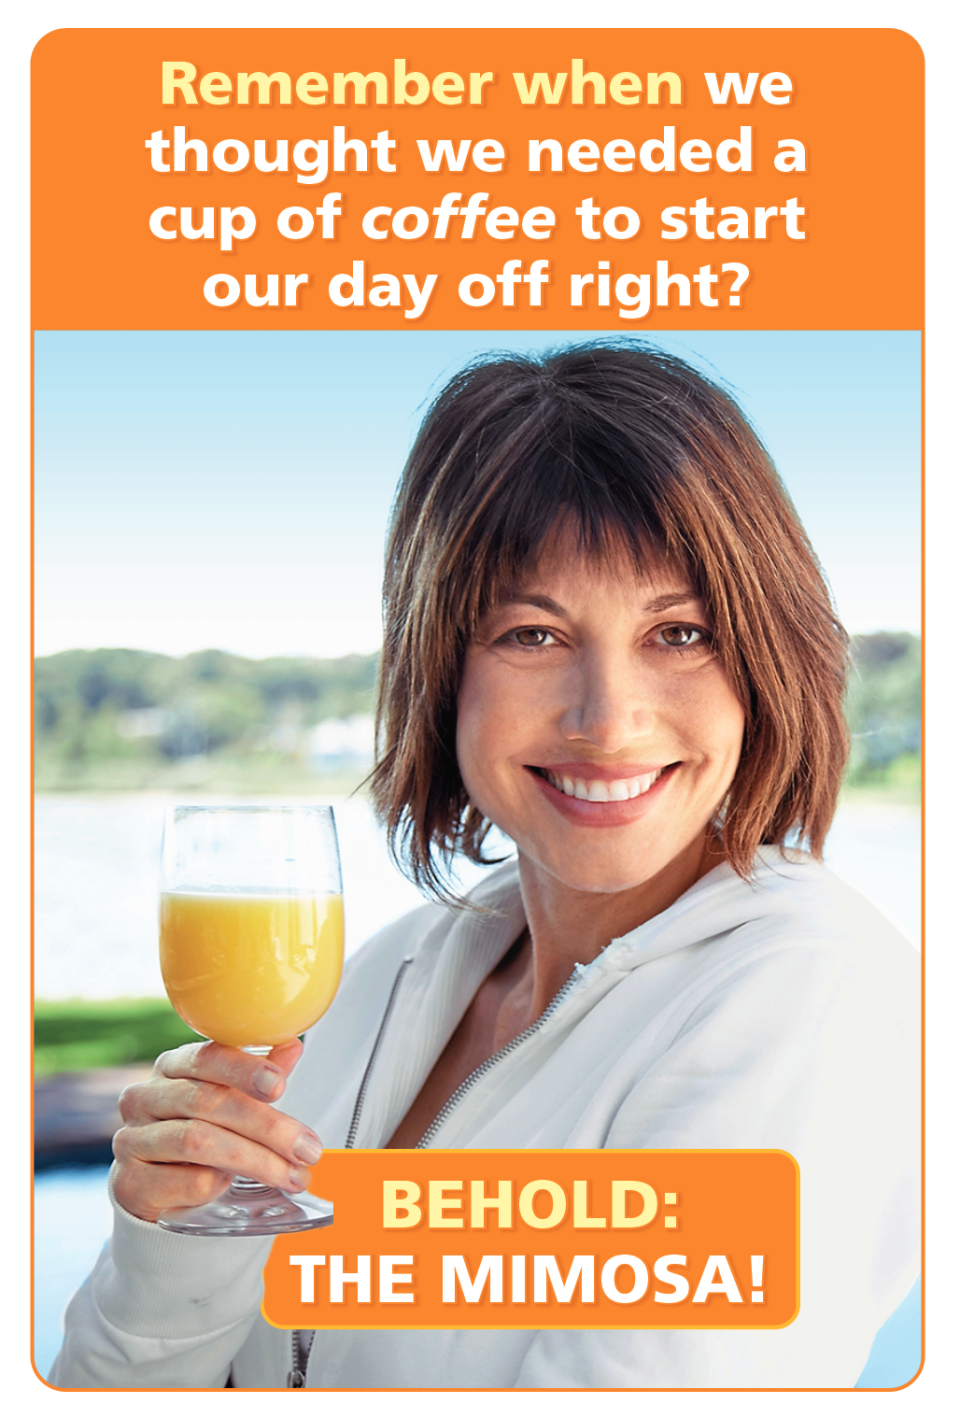 A women stands smiling with her mimosa- wine jokes 